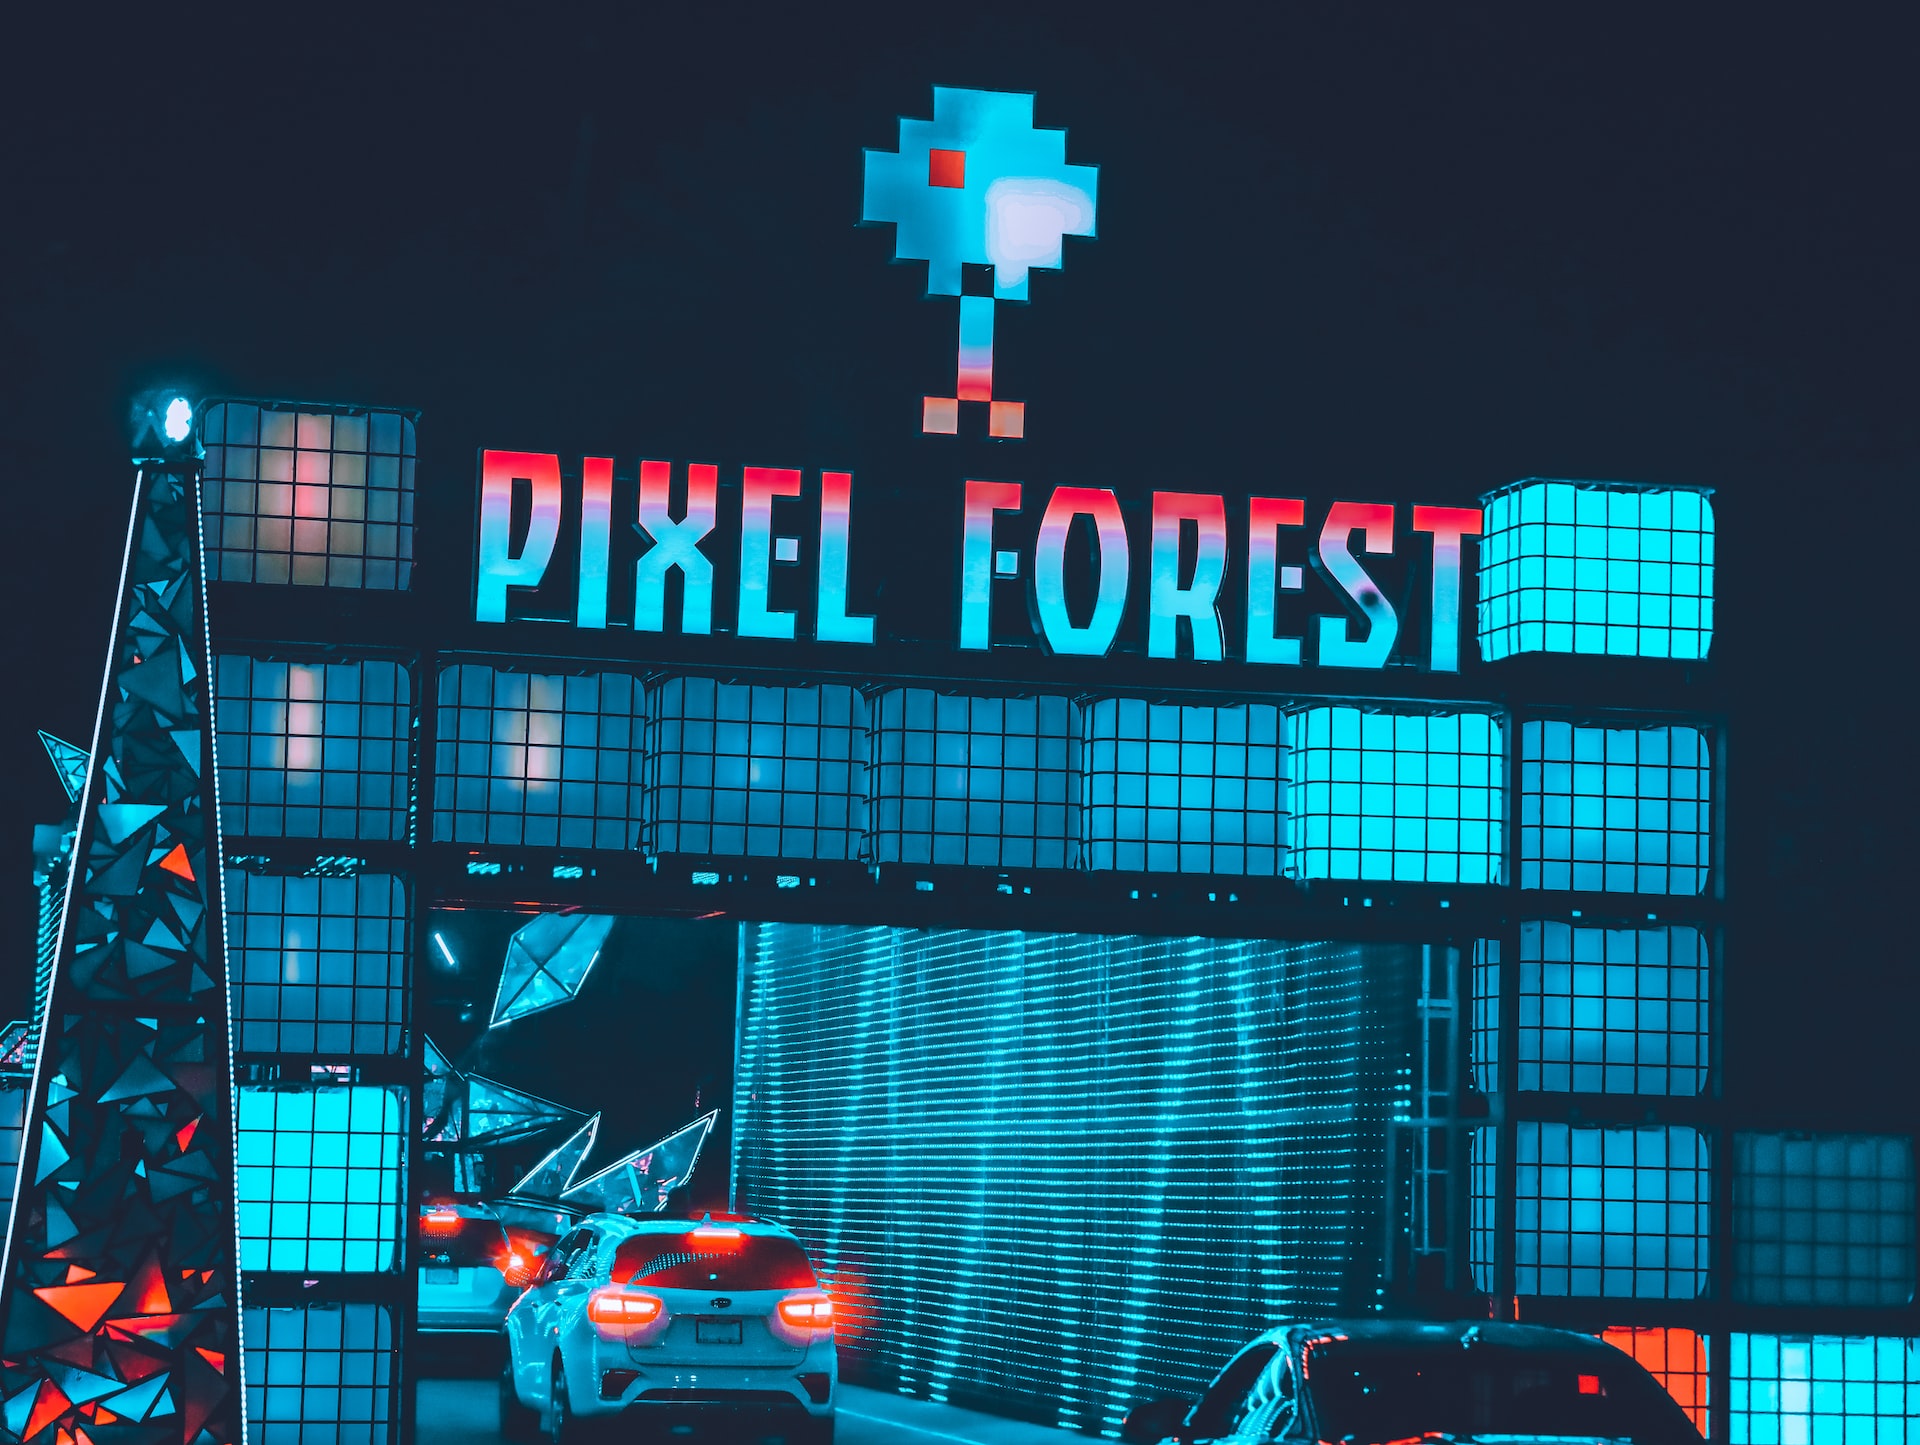 Installation art named pixel forest with cars passing